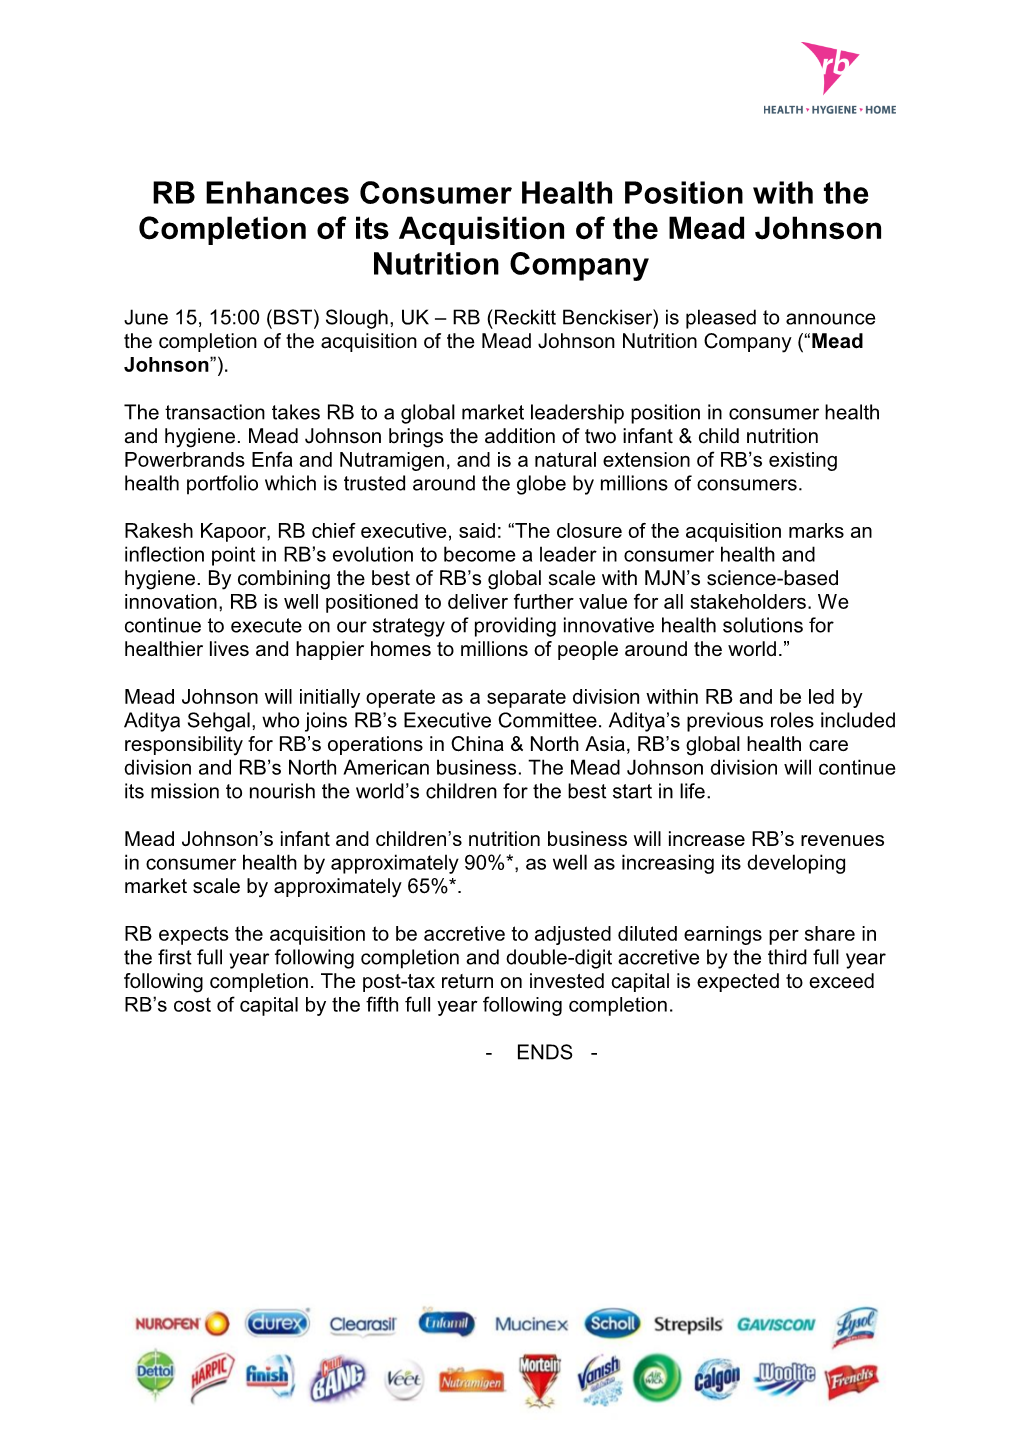 RB Enhances Consumer Health Position with the Completion of Its Acquisition of the Mead Johnson Nutrition Company